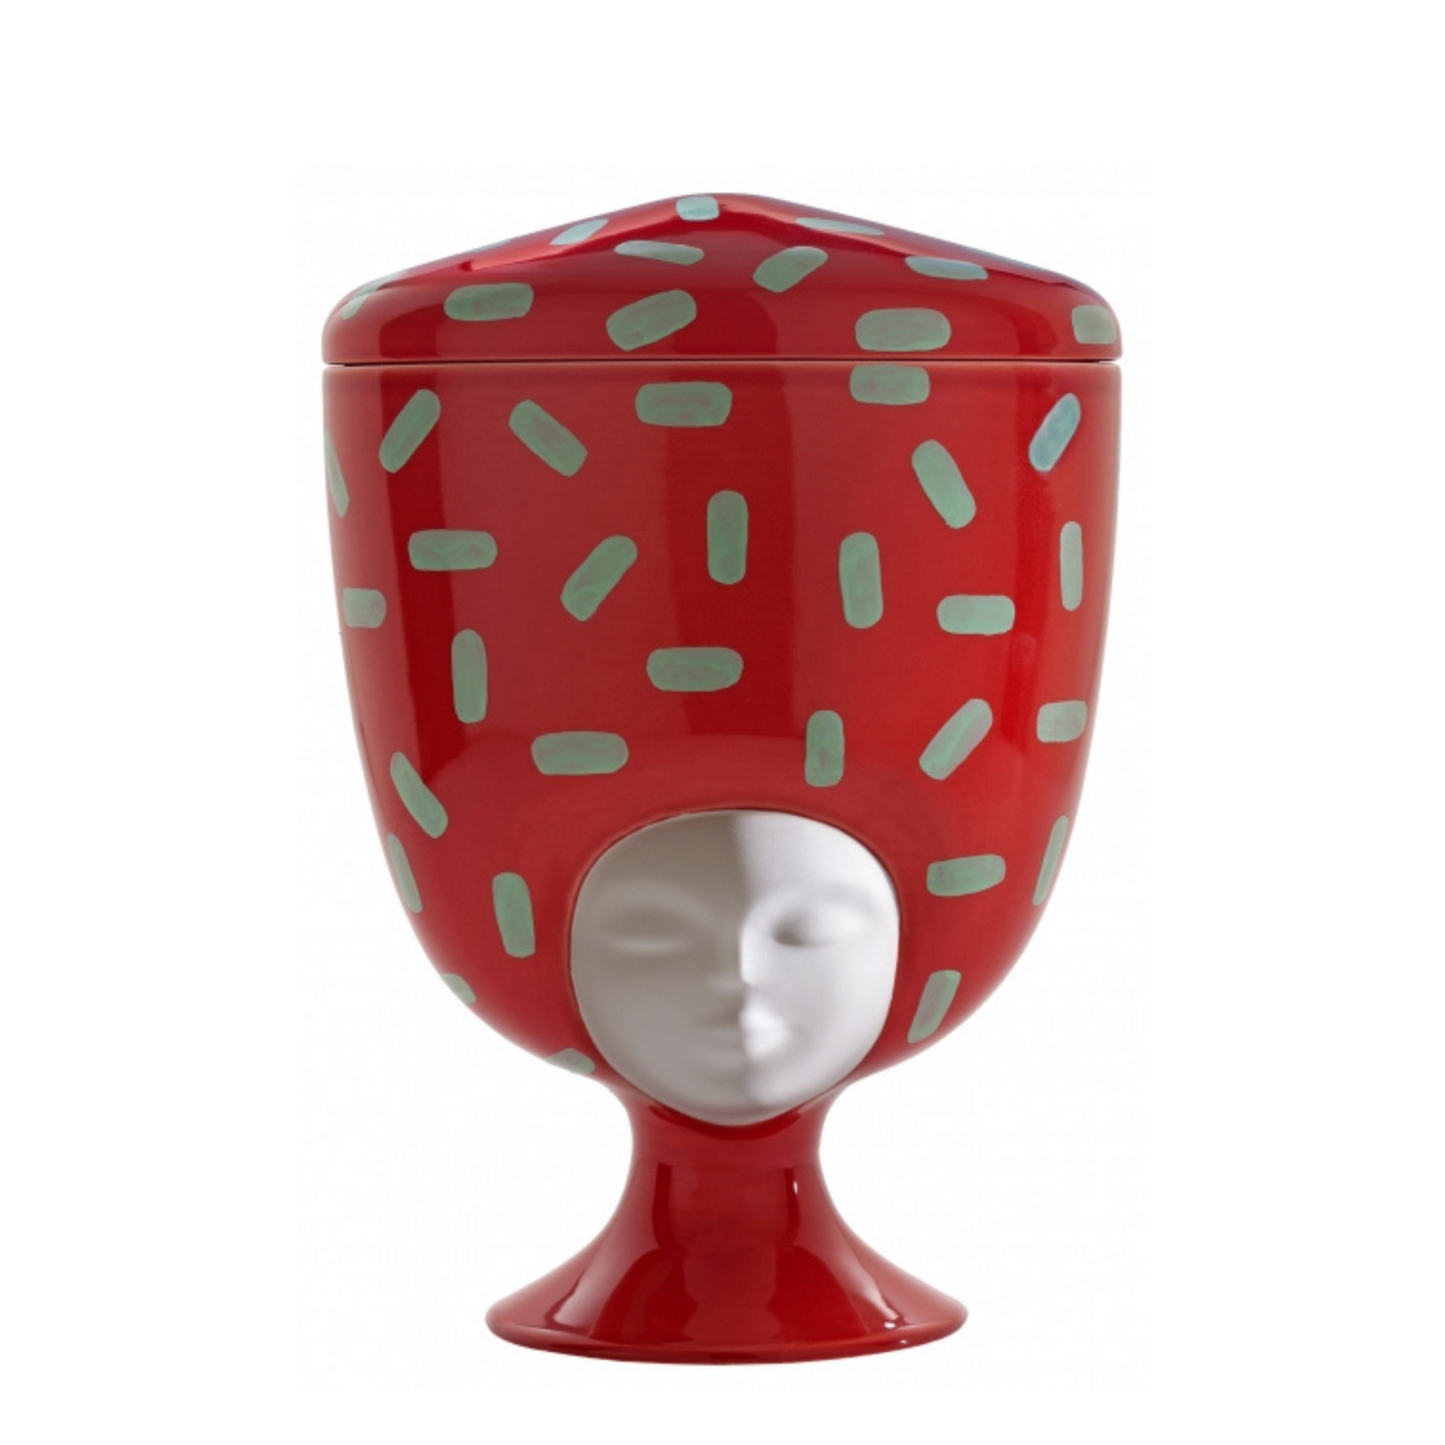 Sister Louise Madagascar Vase in Fire Red and Vintage Green